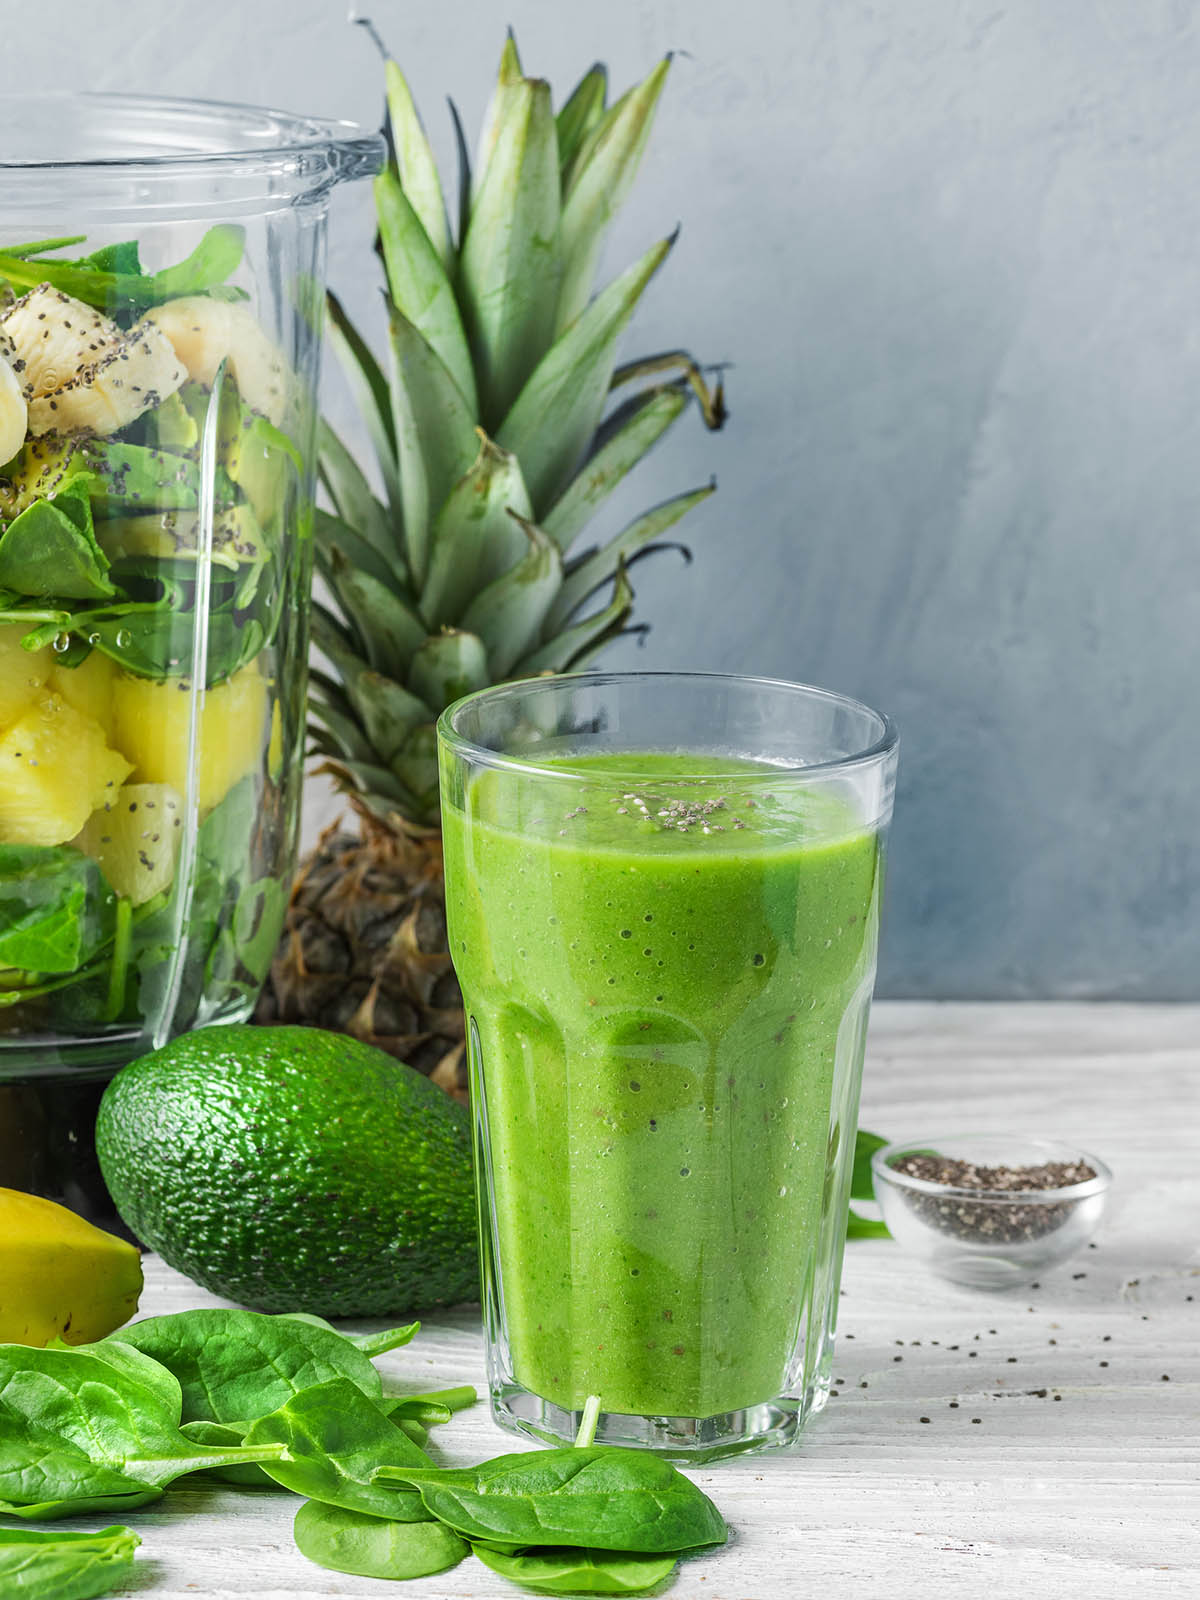 Ingredients for cooking healthy detox green smoothie in blender with glass of smoothie. Vegan cooking concept